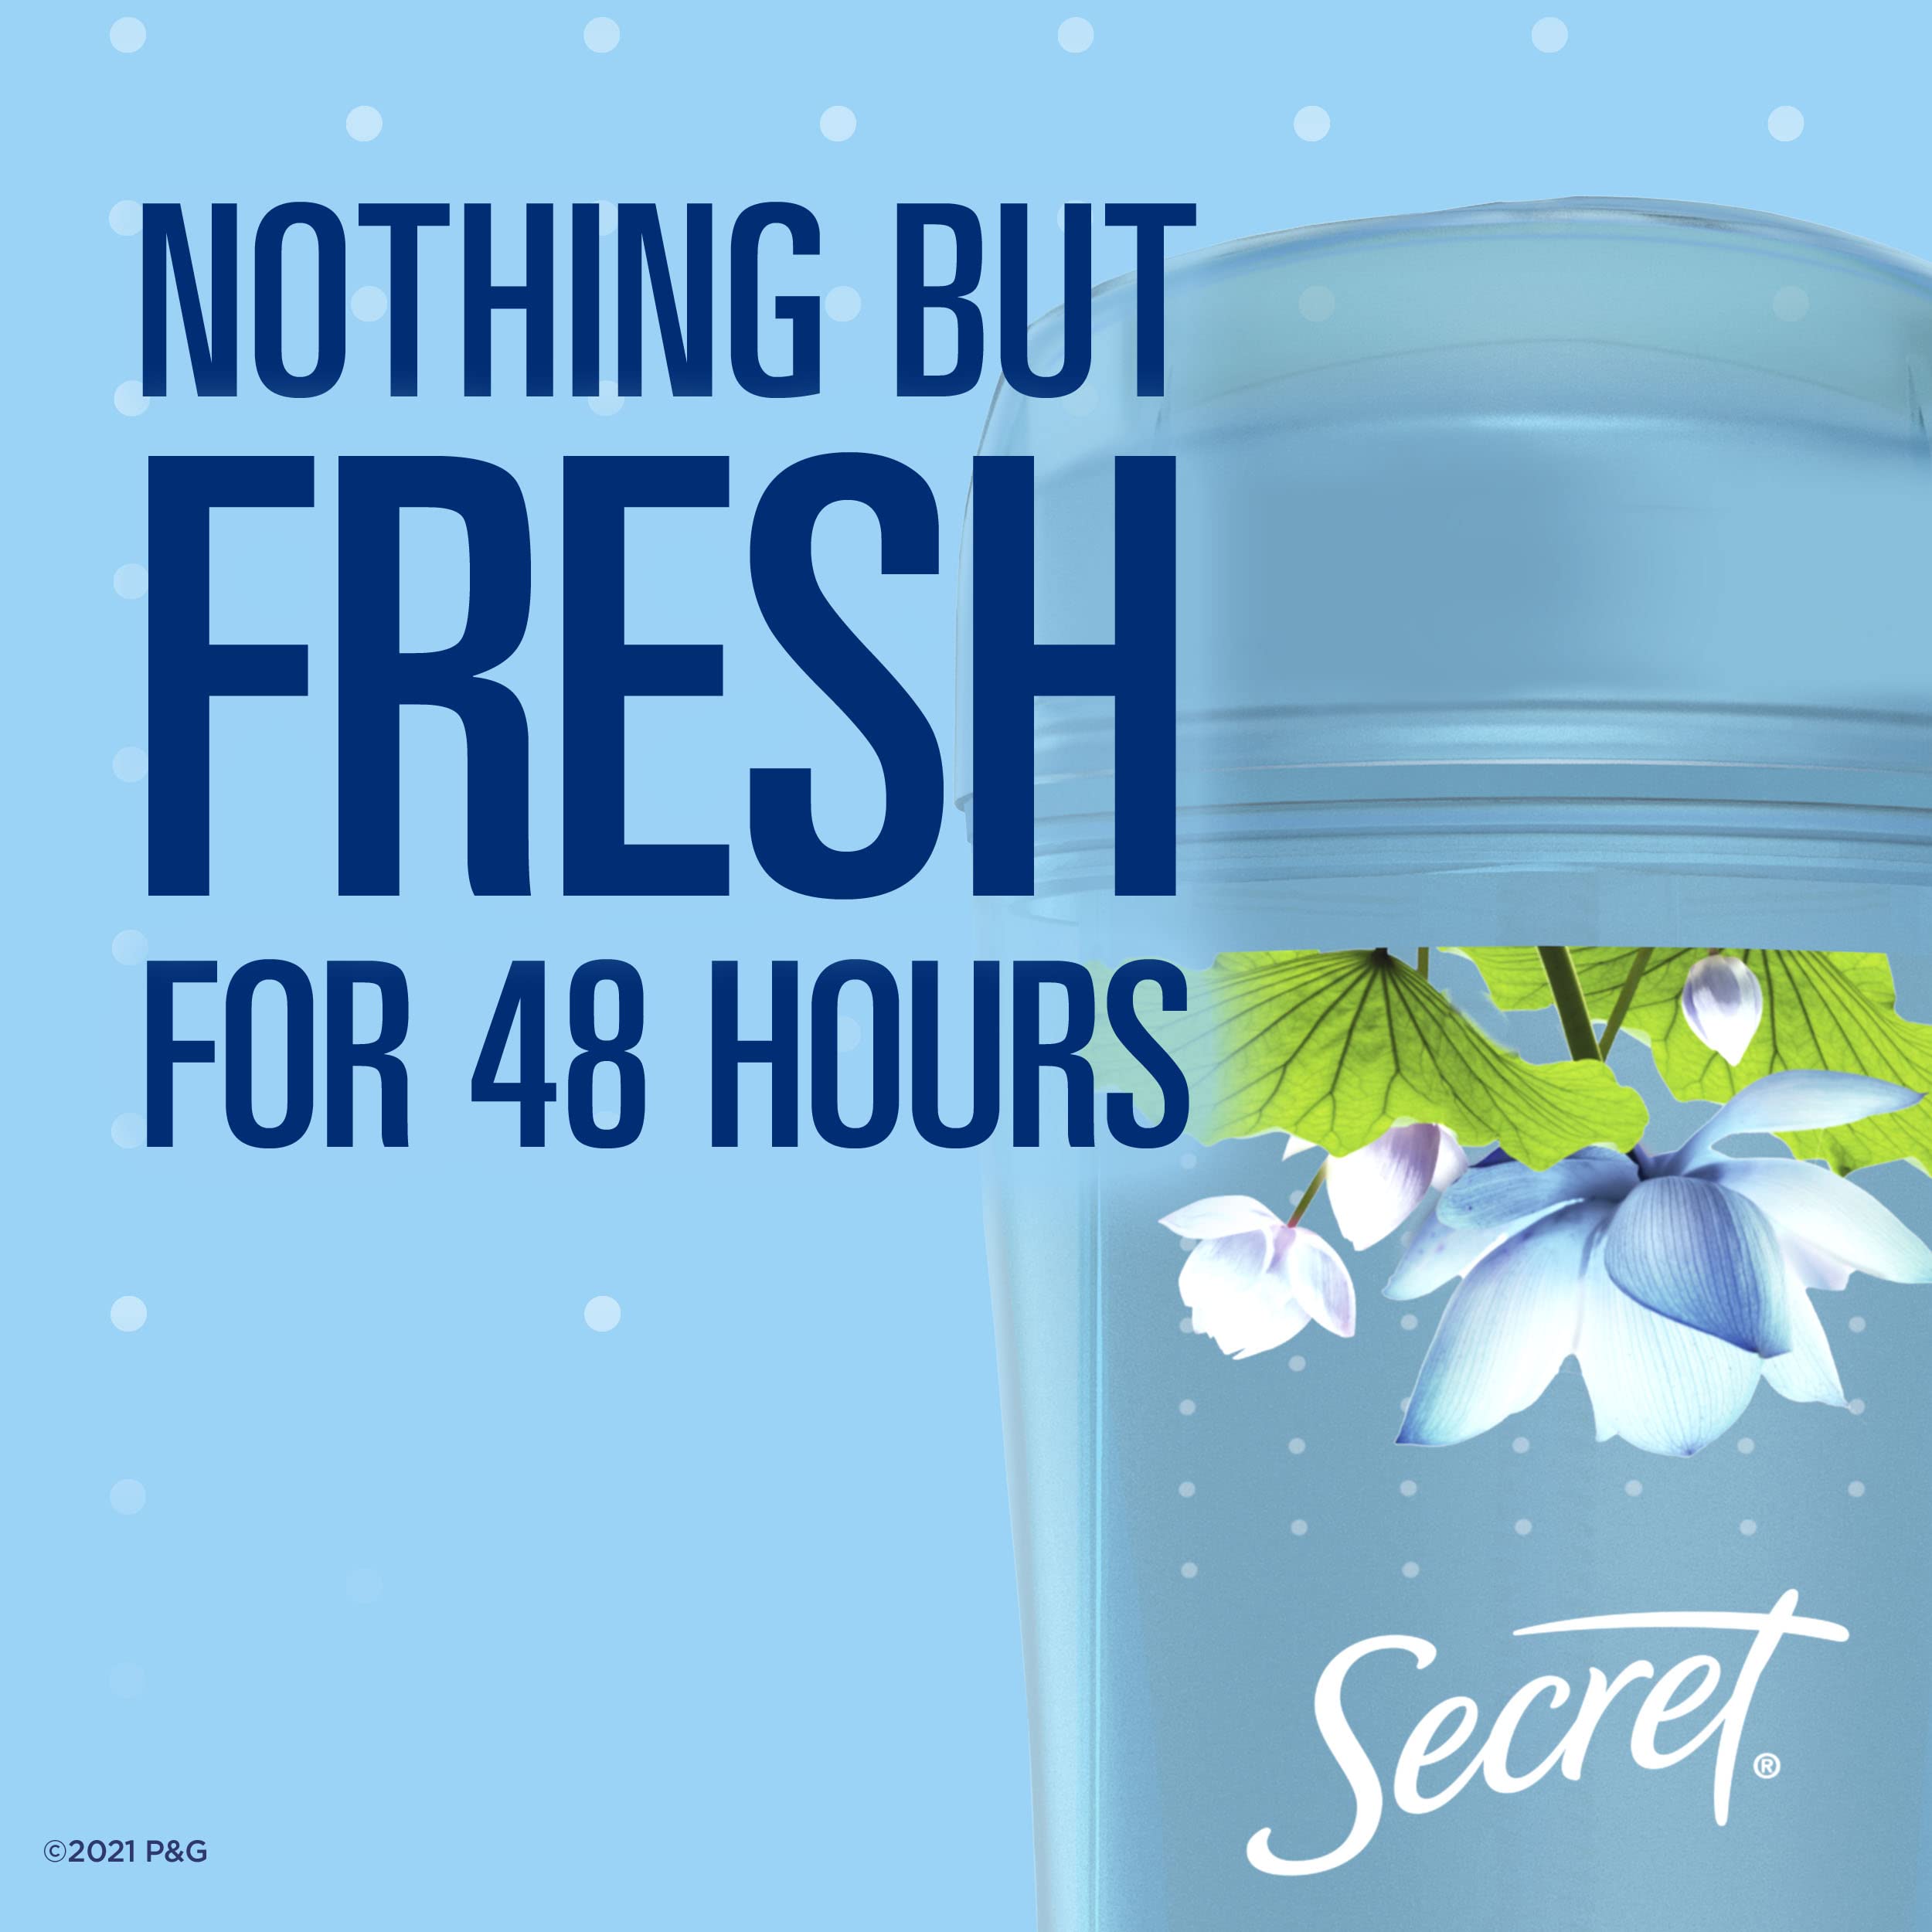 Secret Fresh Clear Gel Antiperspirant and Deodorant for Women, Waterlily Scent, 2.6oz (Pack of 3)